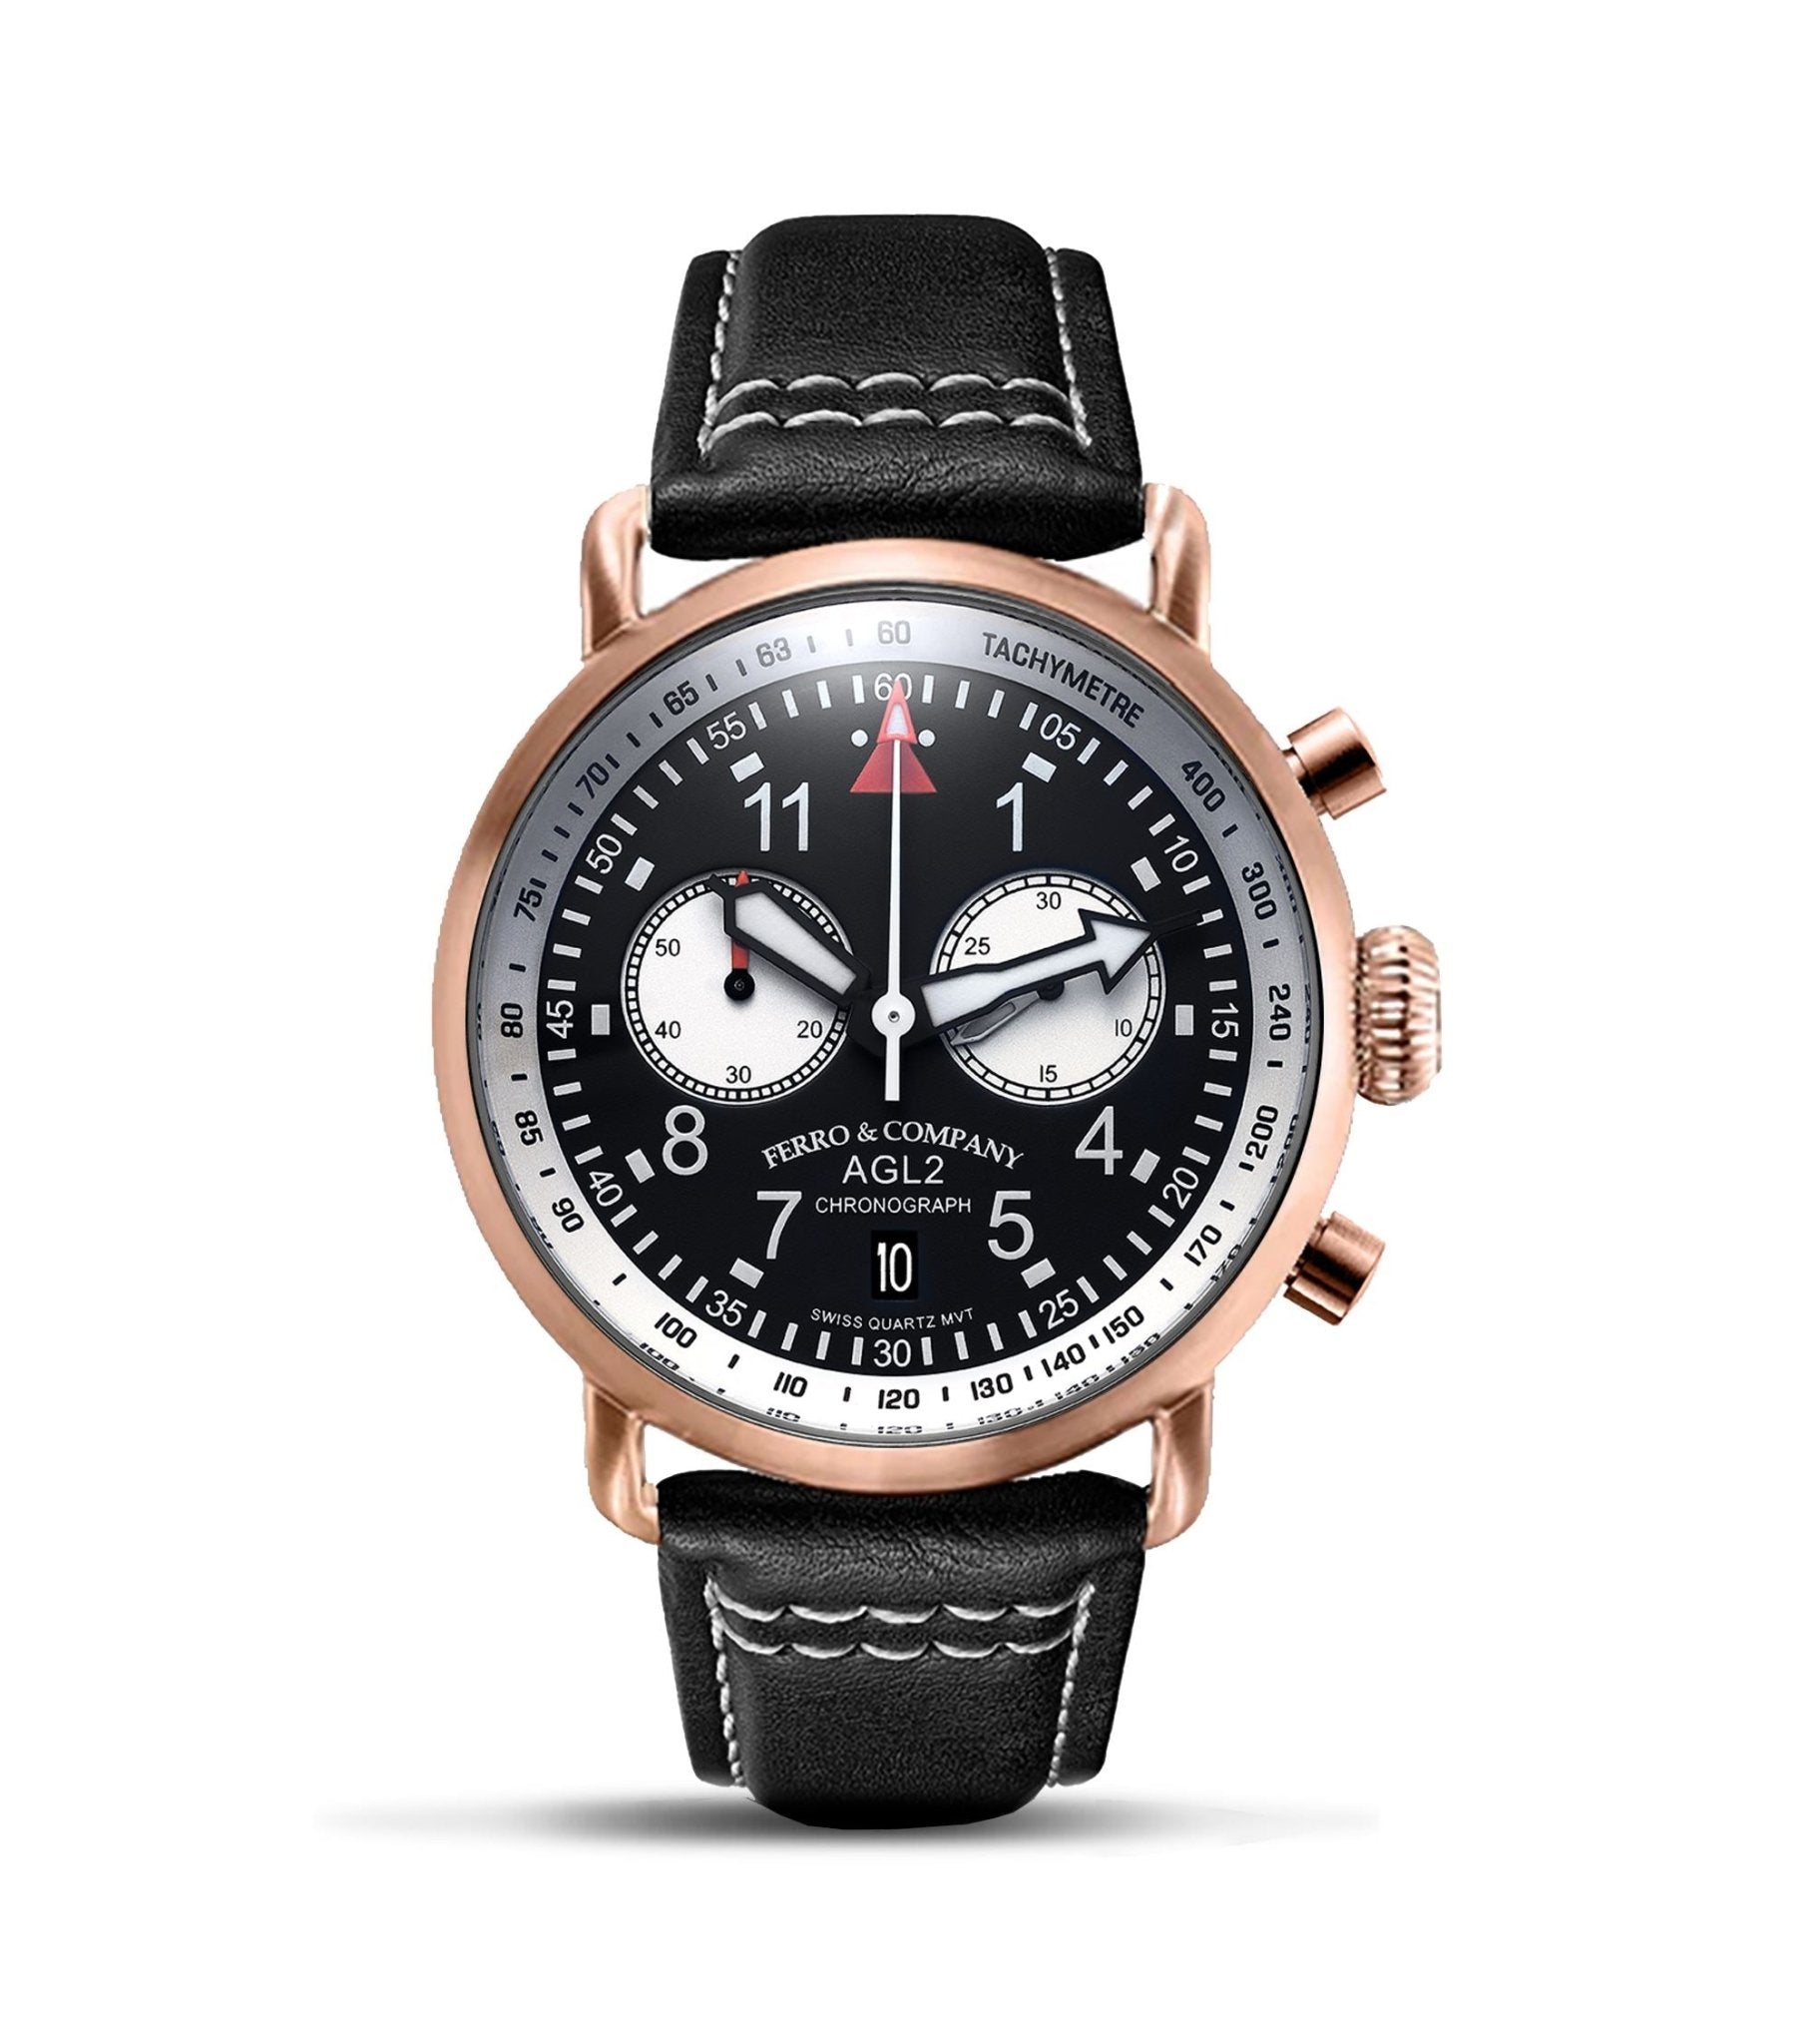 Ferro Watches AGL 2 Vintage style Pilot Watch Chronograph Black / White Rose Gold - Ferro &amp; Company Watches